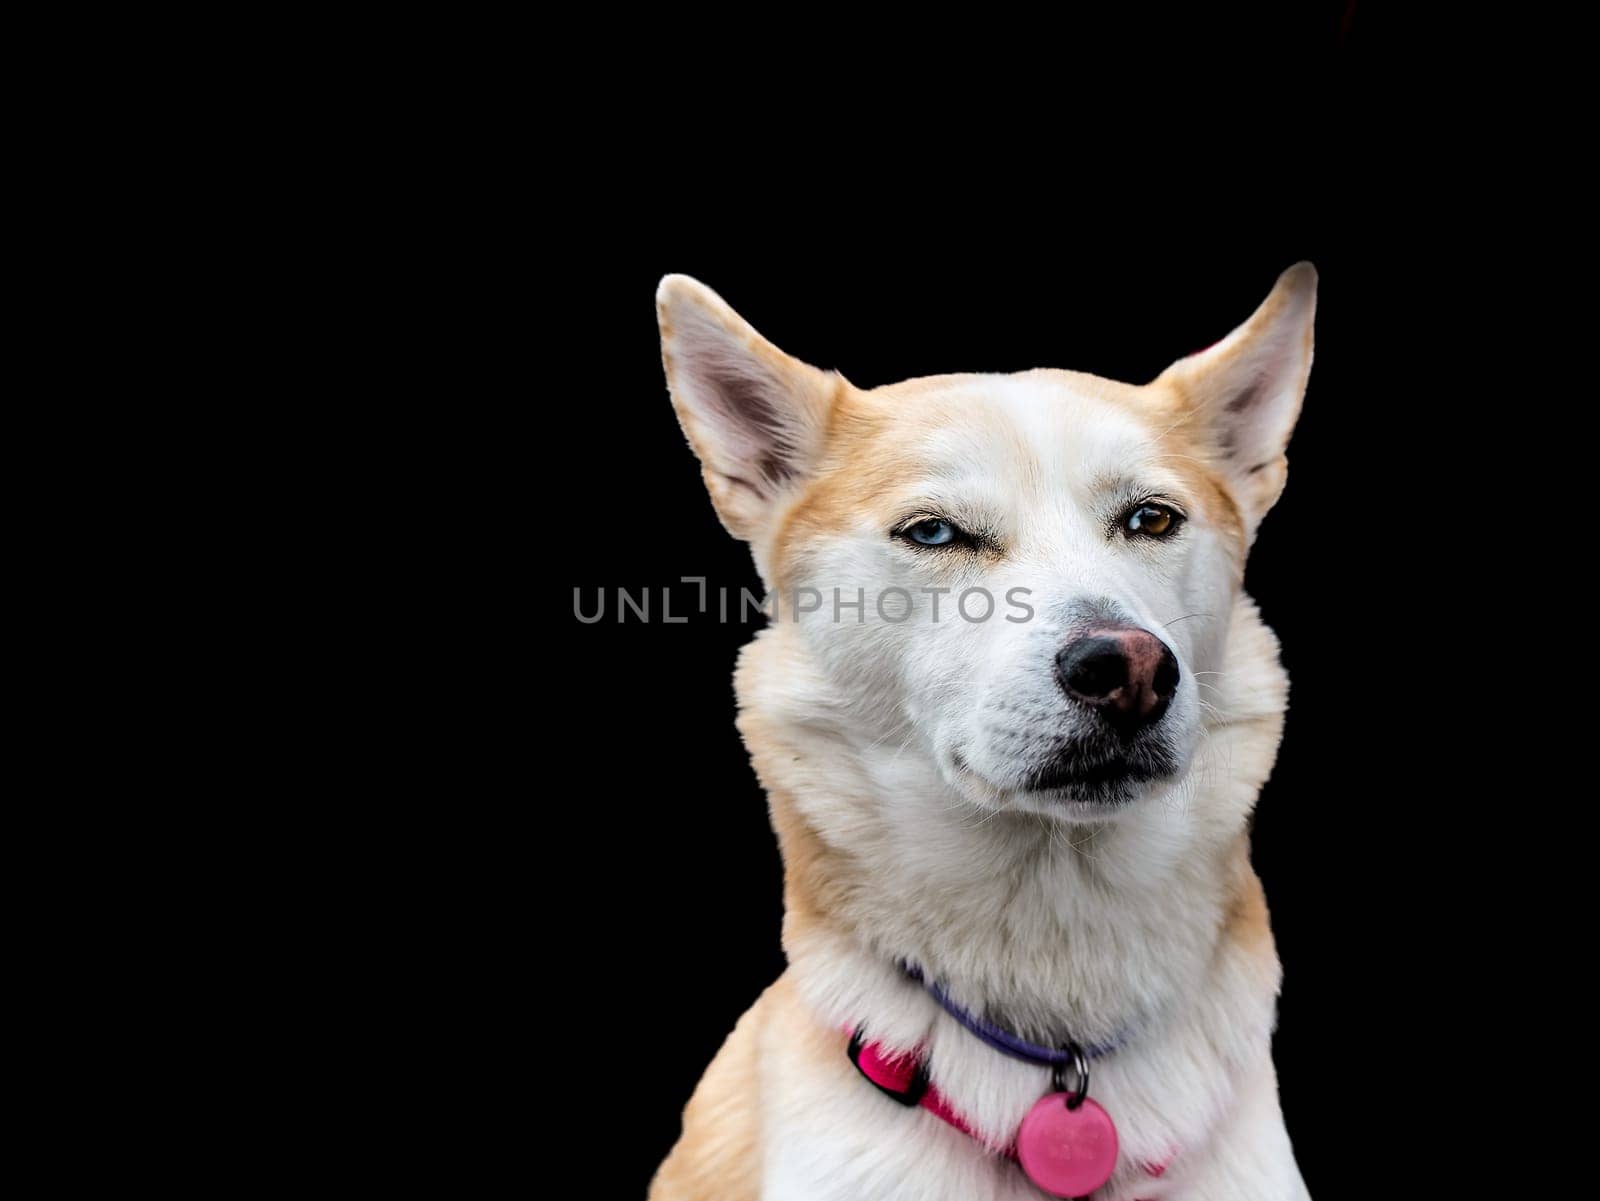 Close-up portrait of a white dog with heterochromia. Eyes of different colors. isolate on balck background. by lempro